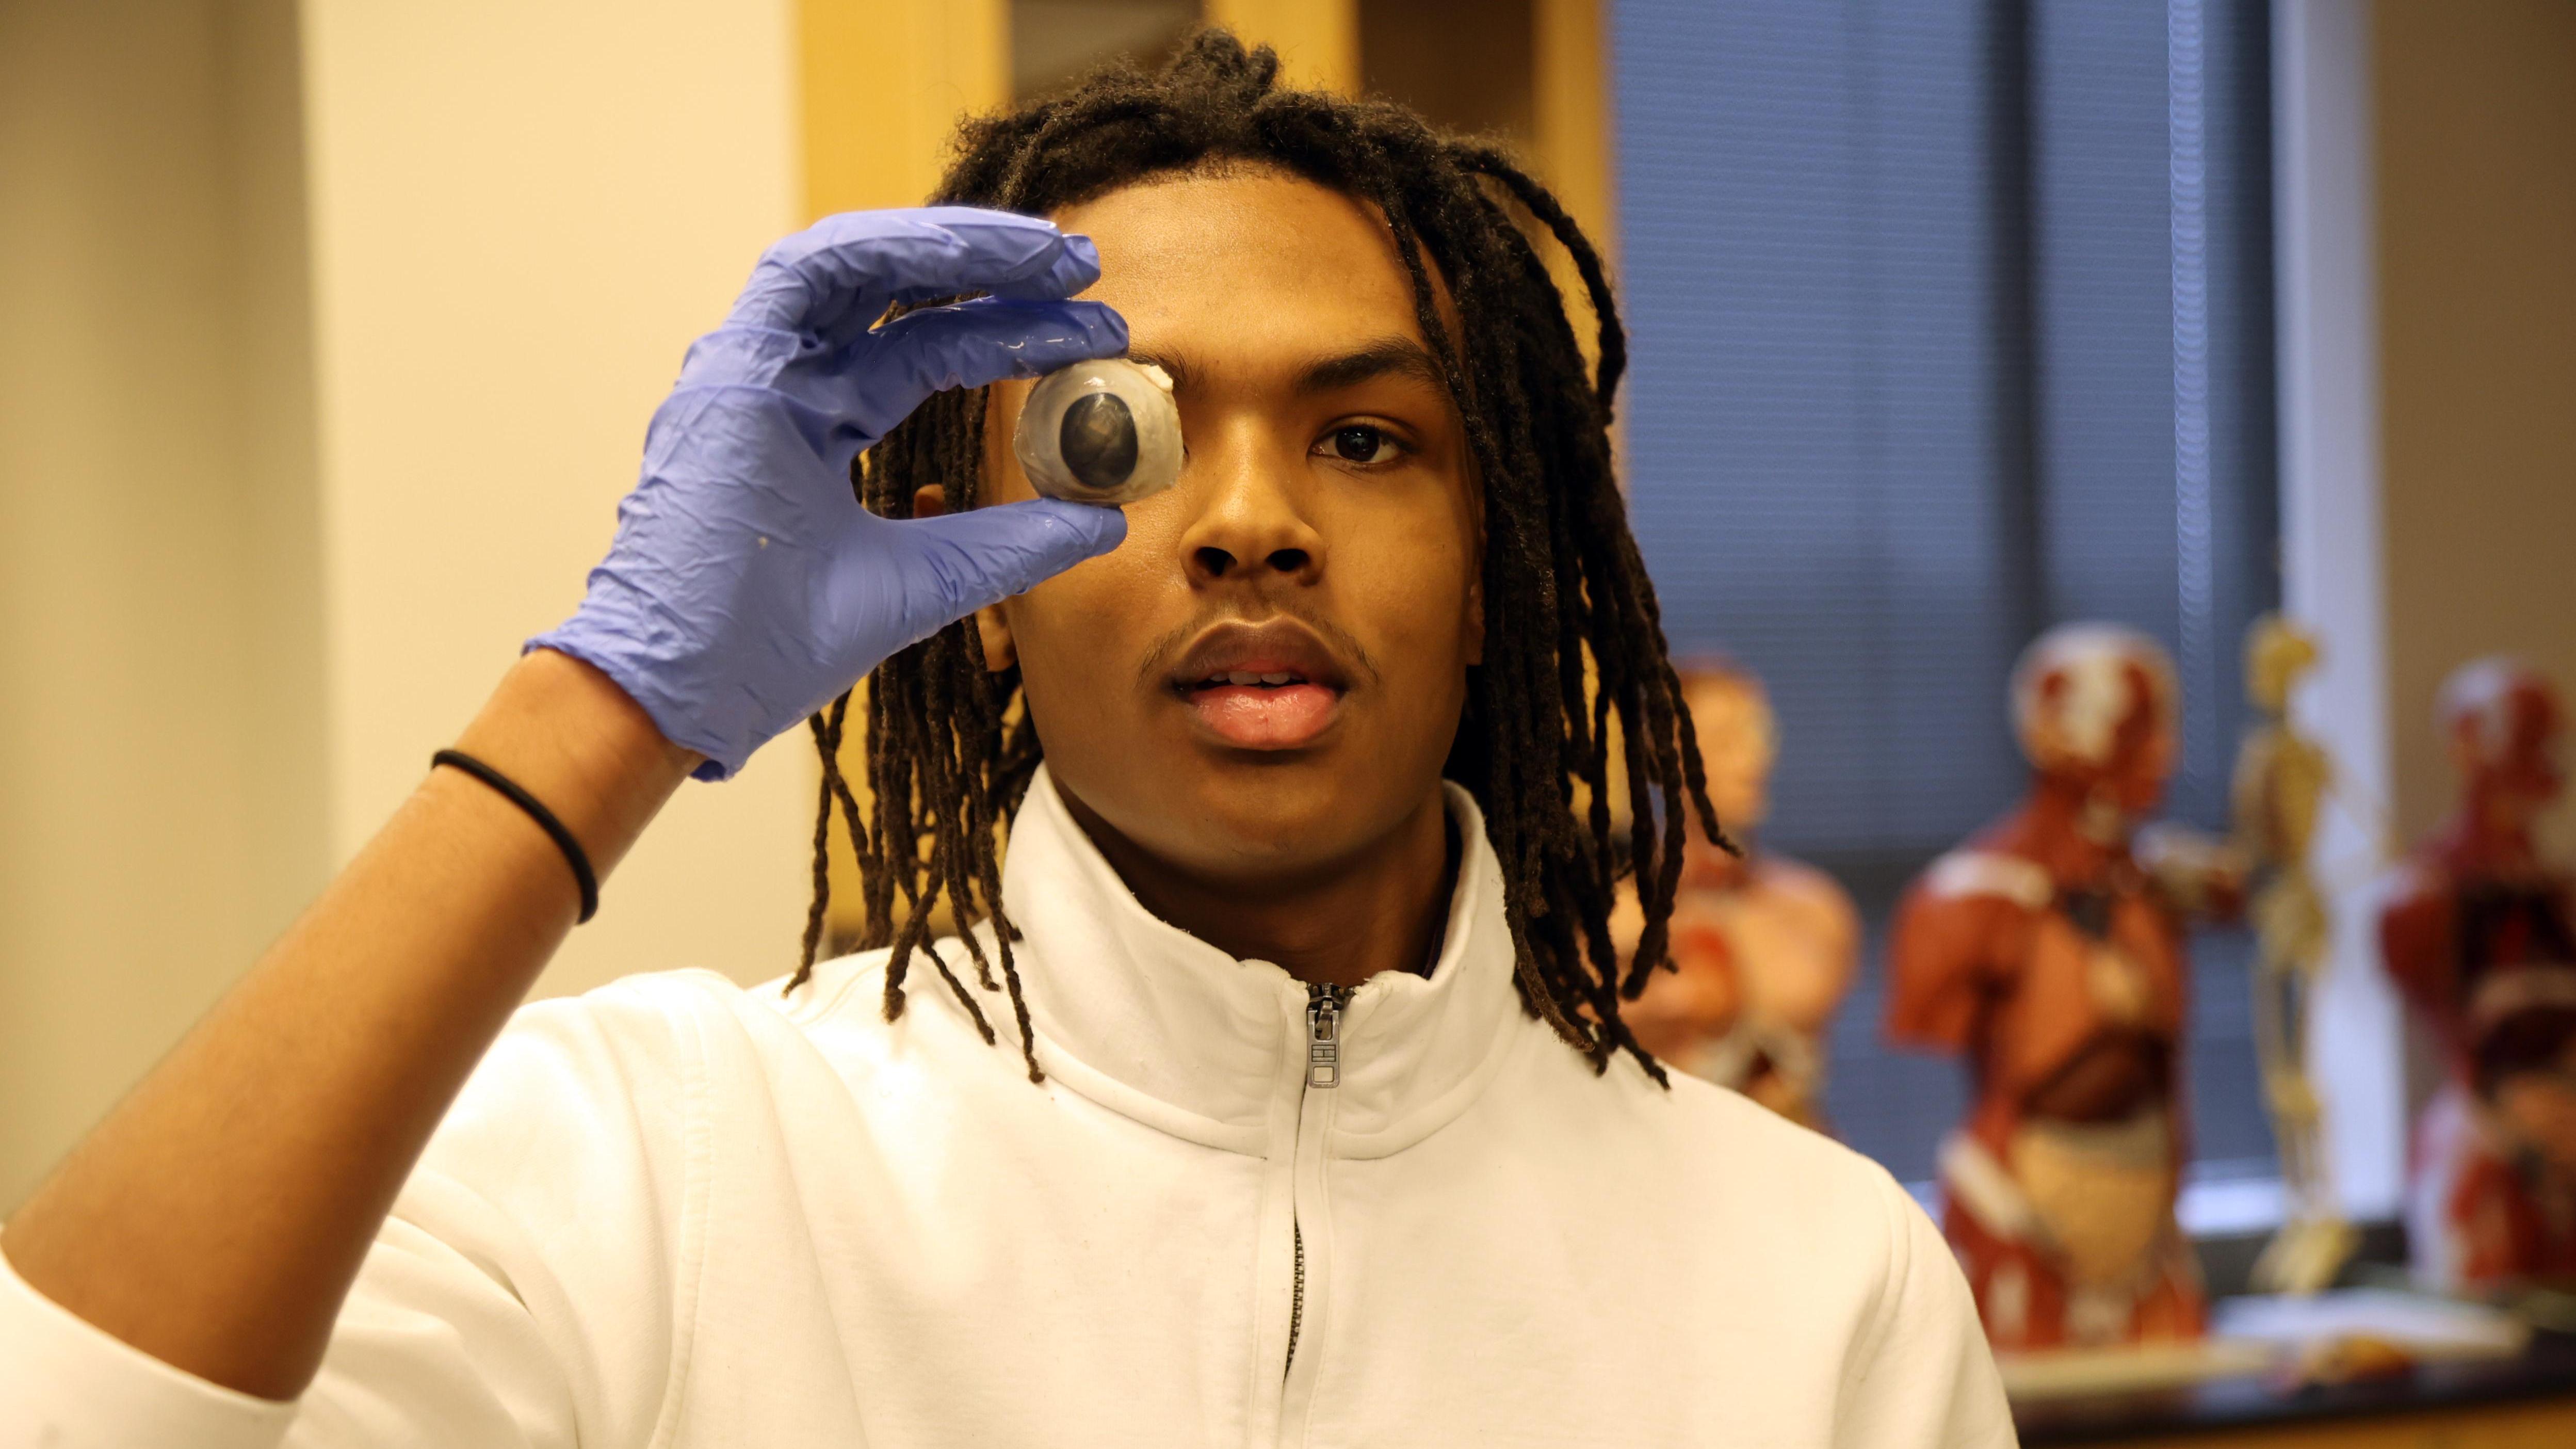 A student holds a cow eye in front of his face